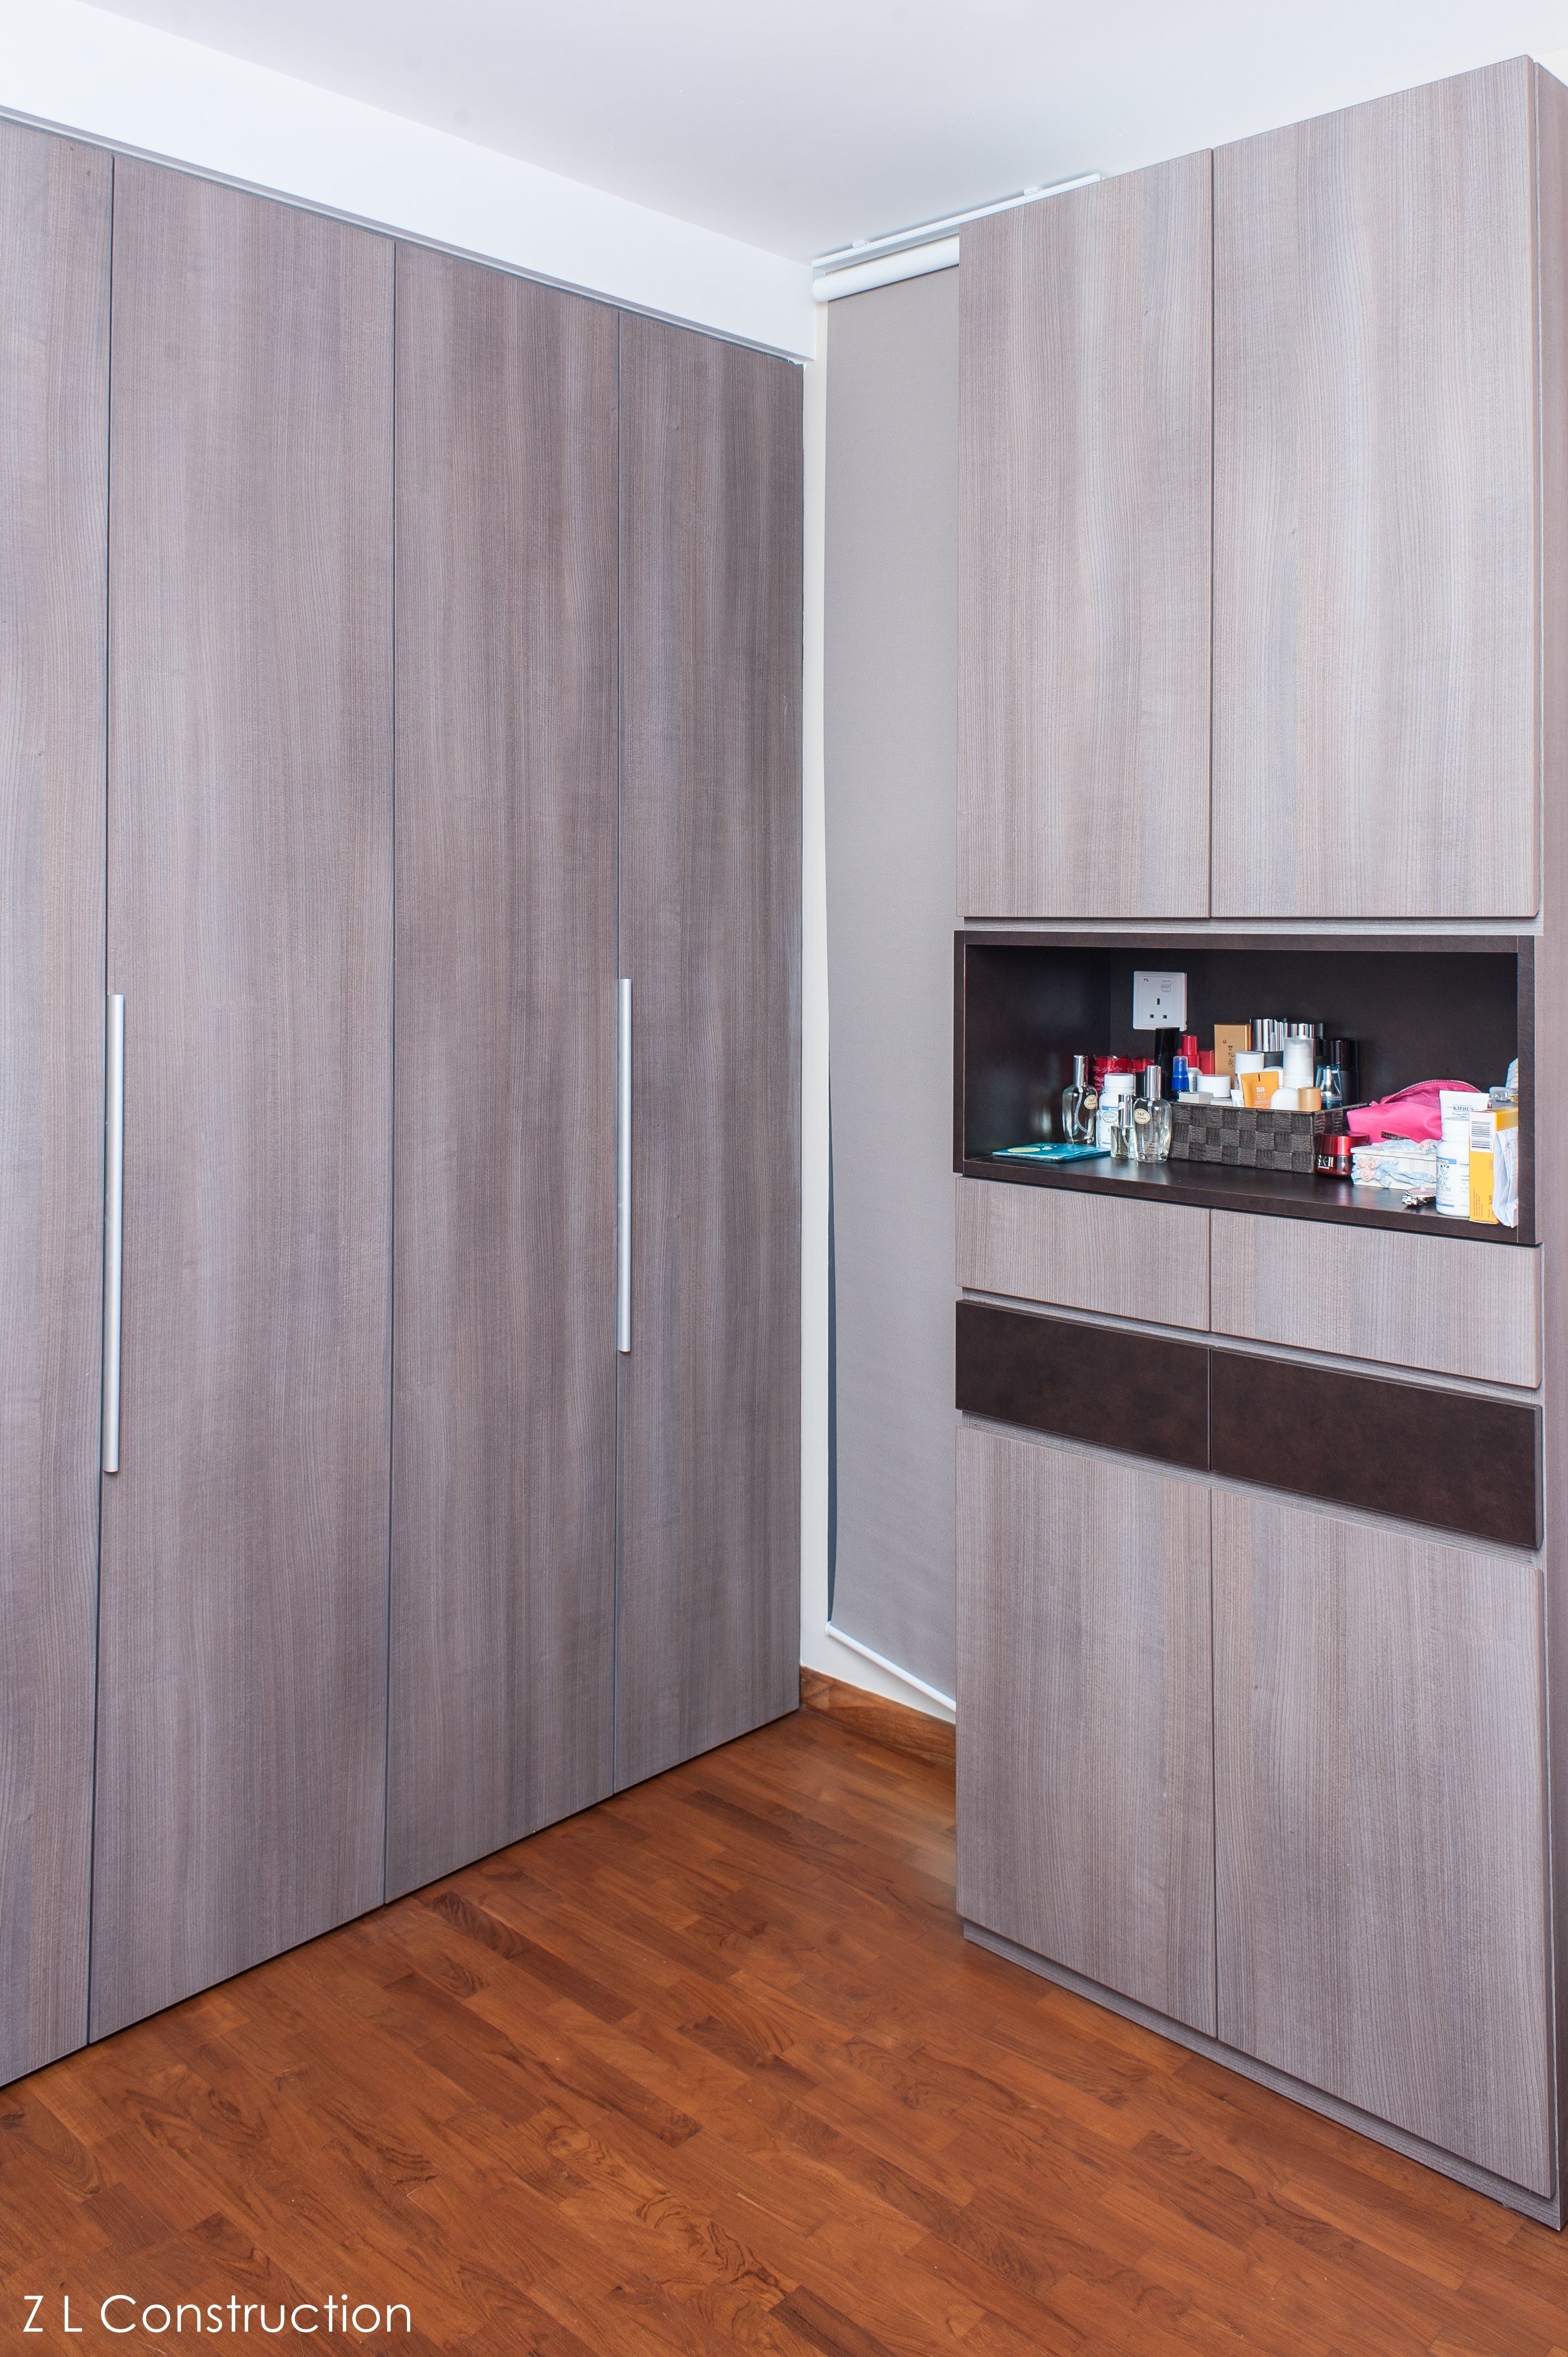 Z L Construction Singapore Wood Grained Laminated Wardrobe Pertaining To Dark Wardrobes (View 14 of 15)